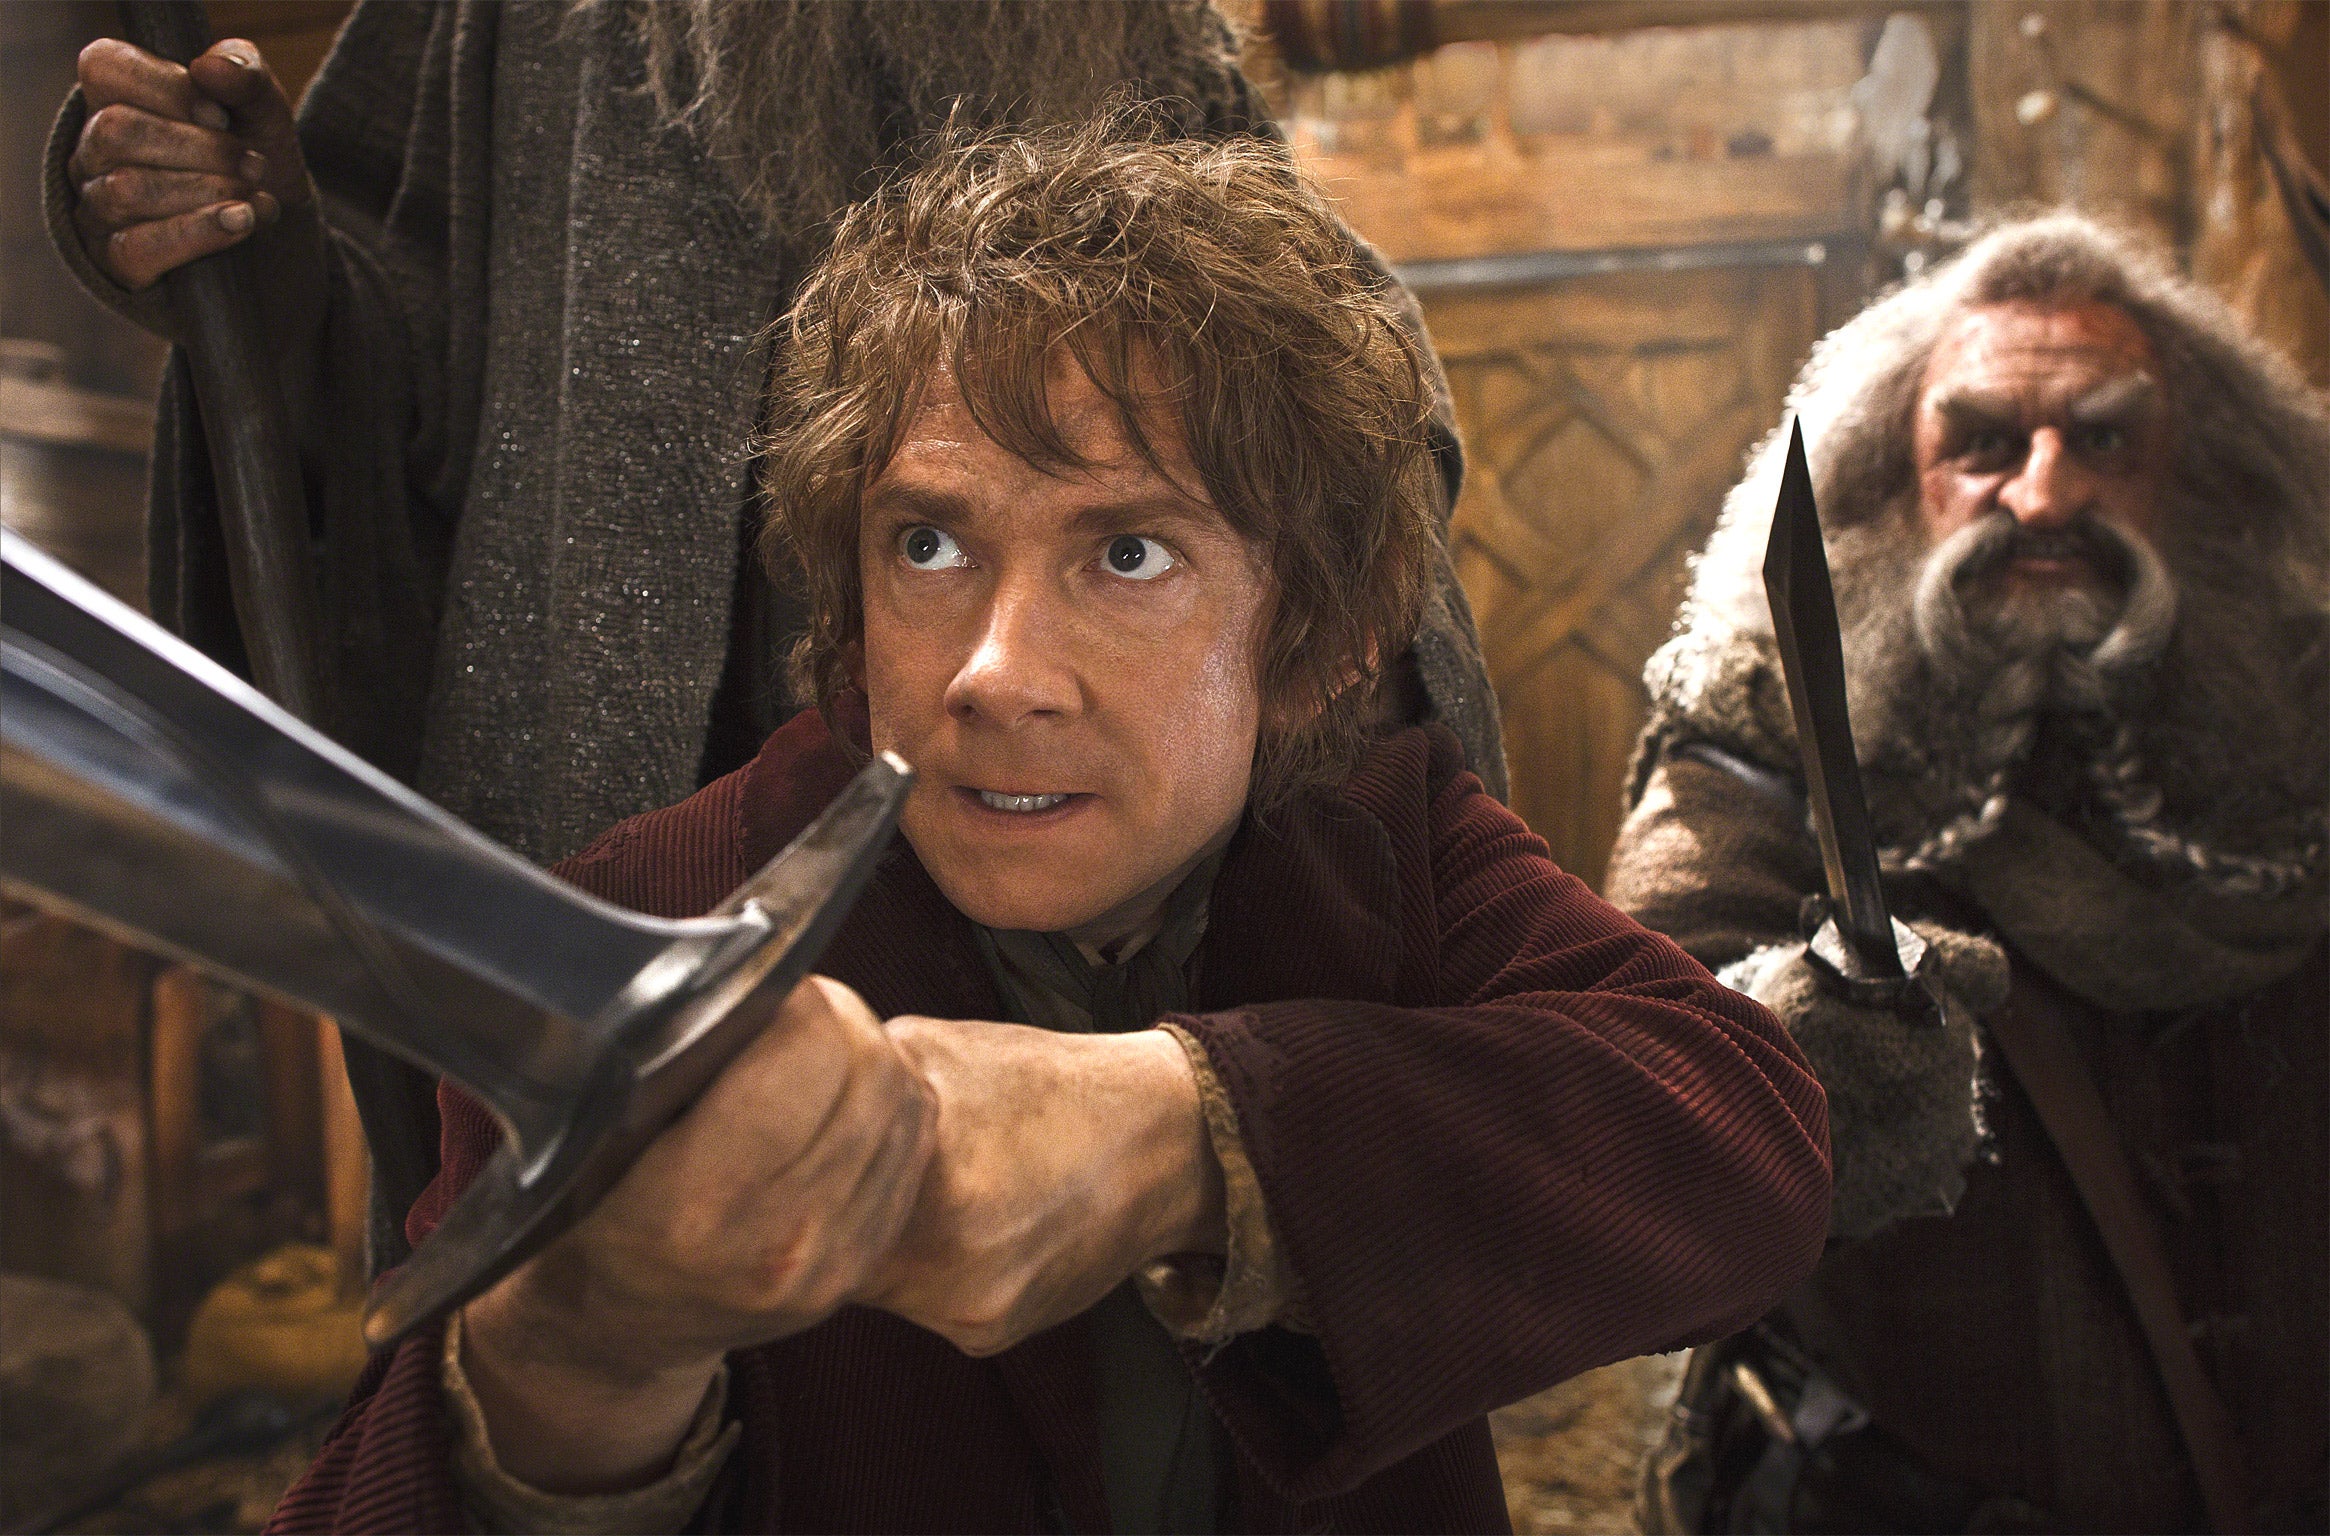 Martin Freeman as Bilbo Baggins in a scene from 'The Hobbit: The Desolation of Smaug'